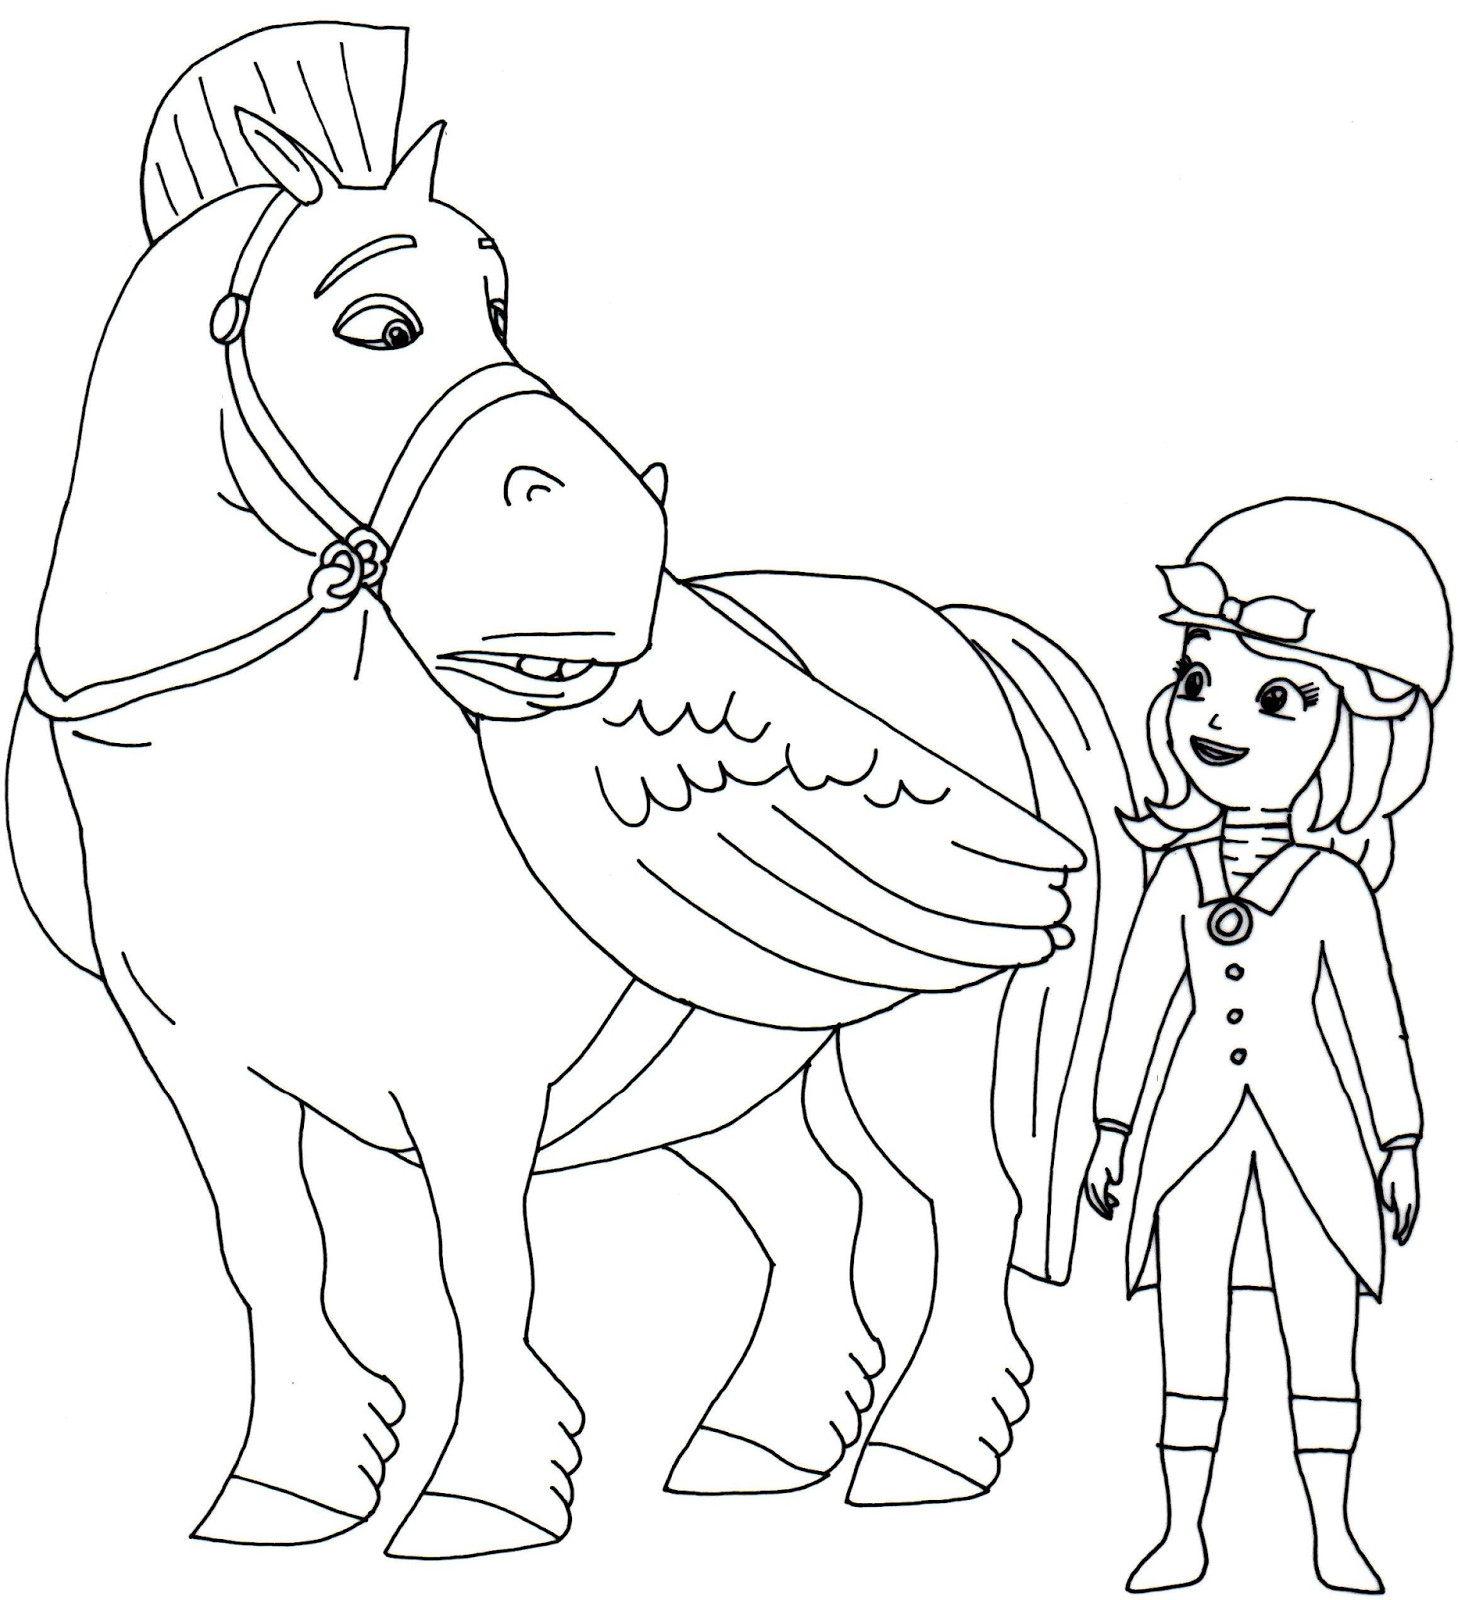 Sofia The First Coloring Pages
 Sofia The First Coloring Pages Minimus the Great and